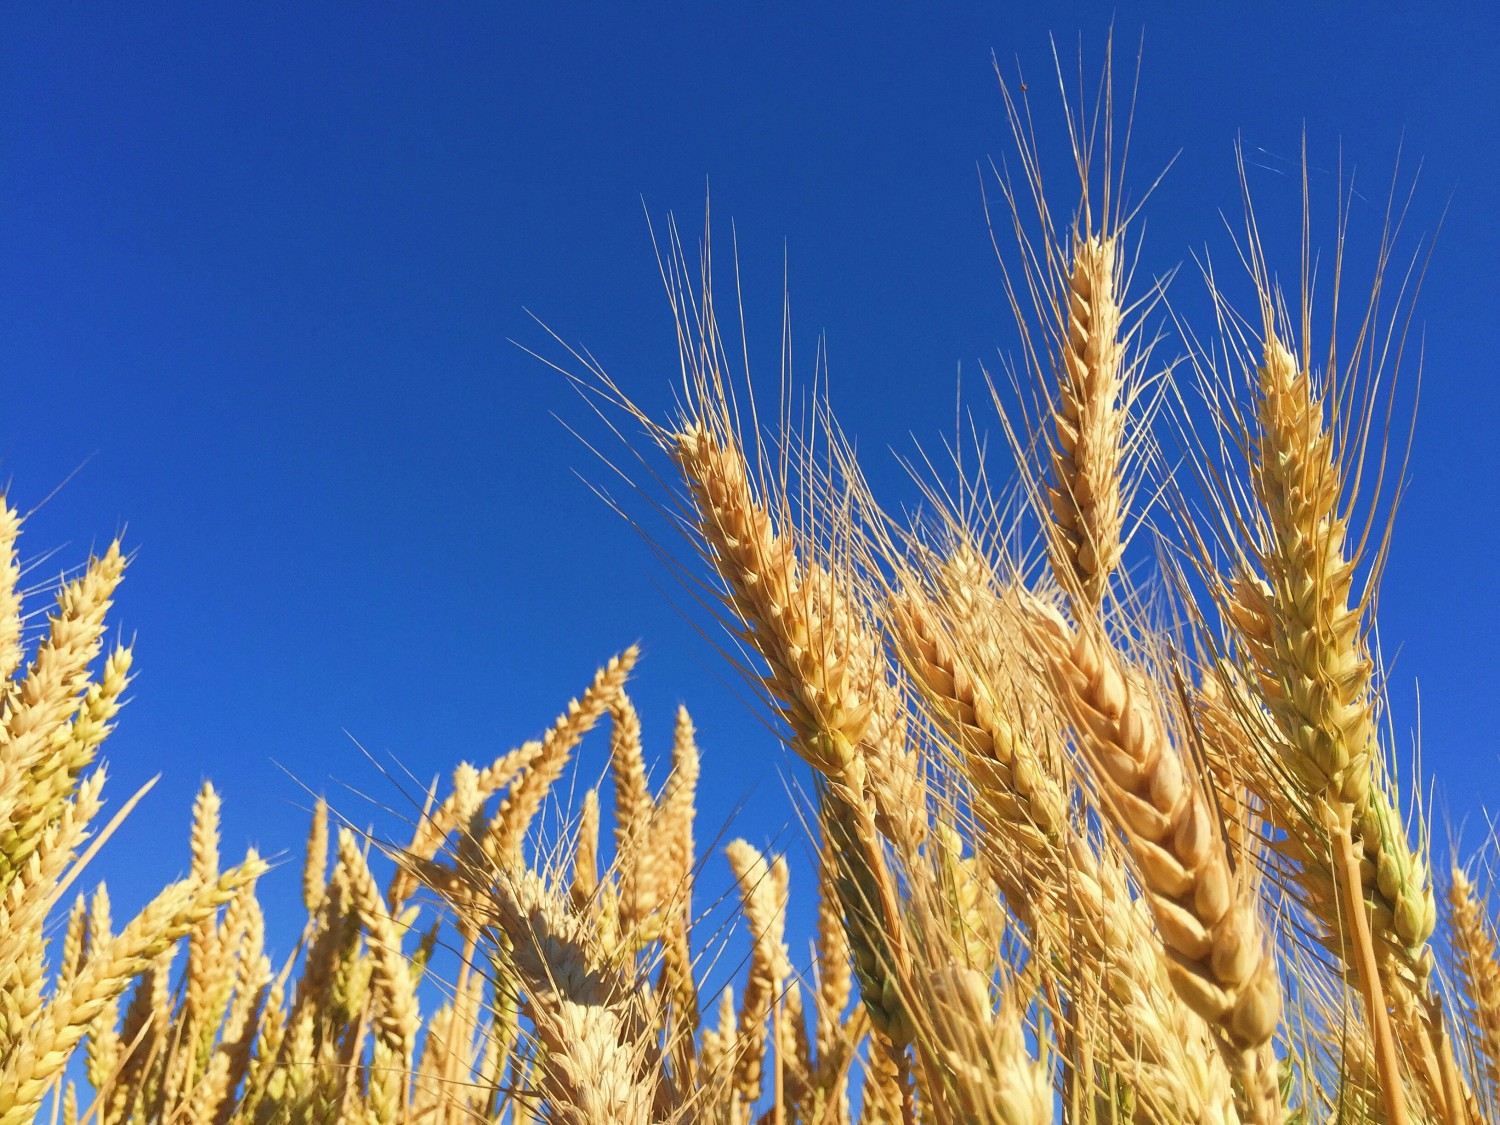 International Workshop on the Global Food Value Chains: Focus on the Global Grain Trade